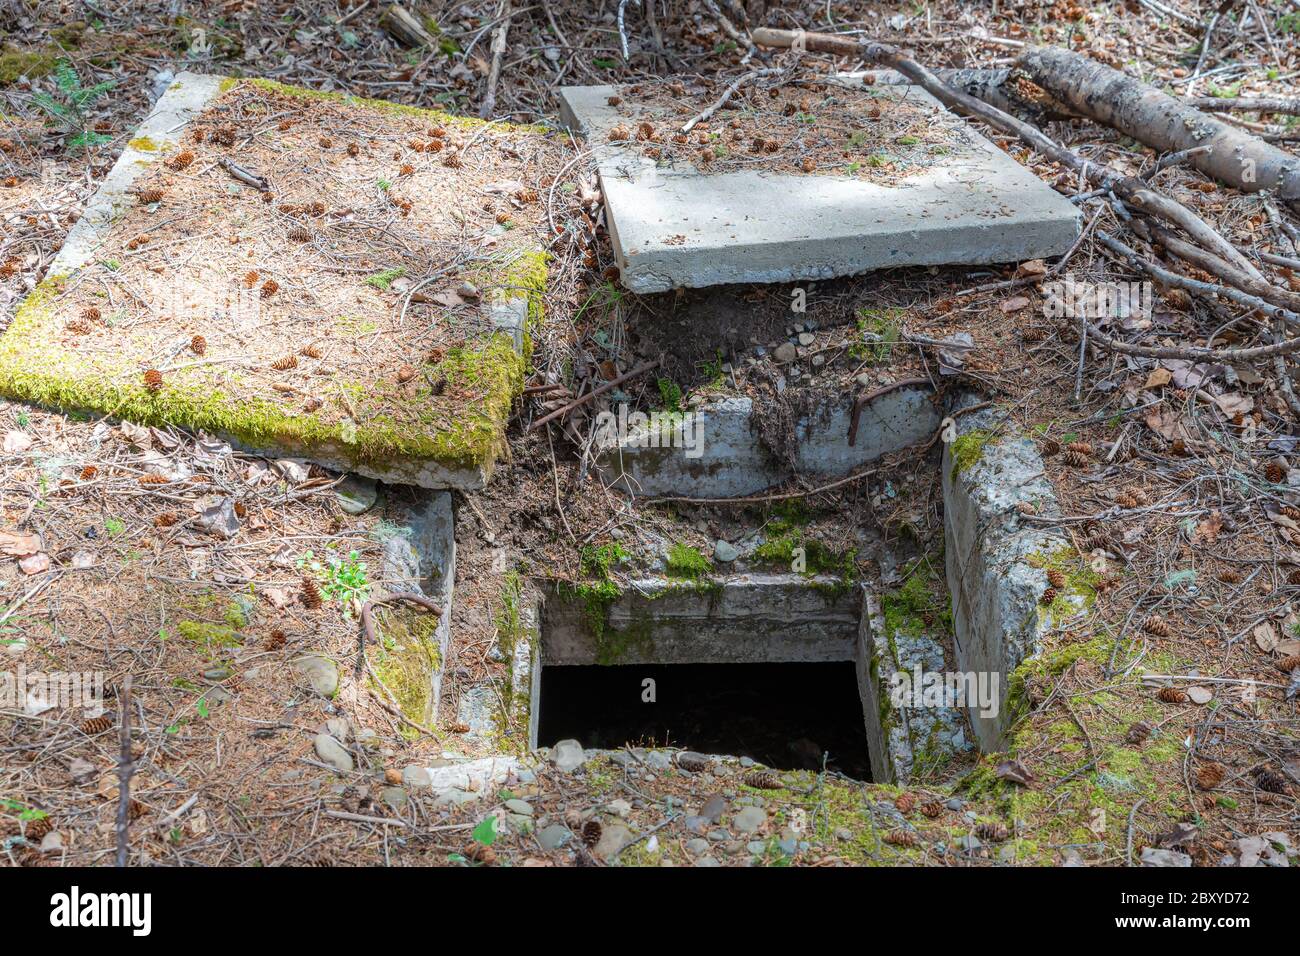 The entrance to an old underground concrete bunker. The entrance is open with two concrete covers on the ground. Situated in the woods. Stock Photo